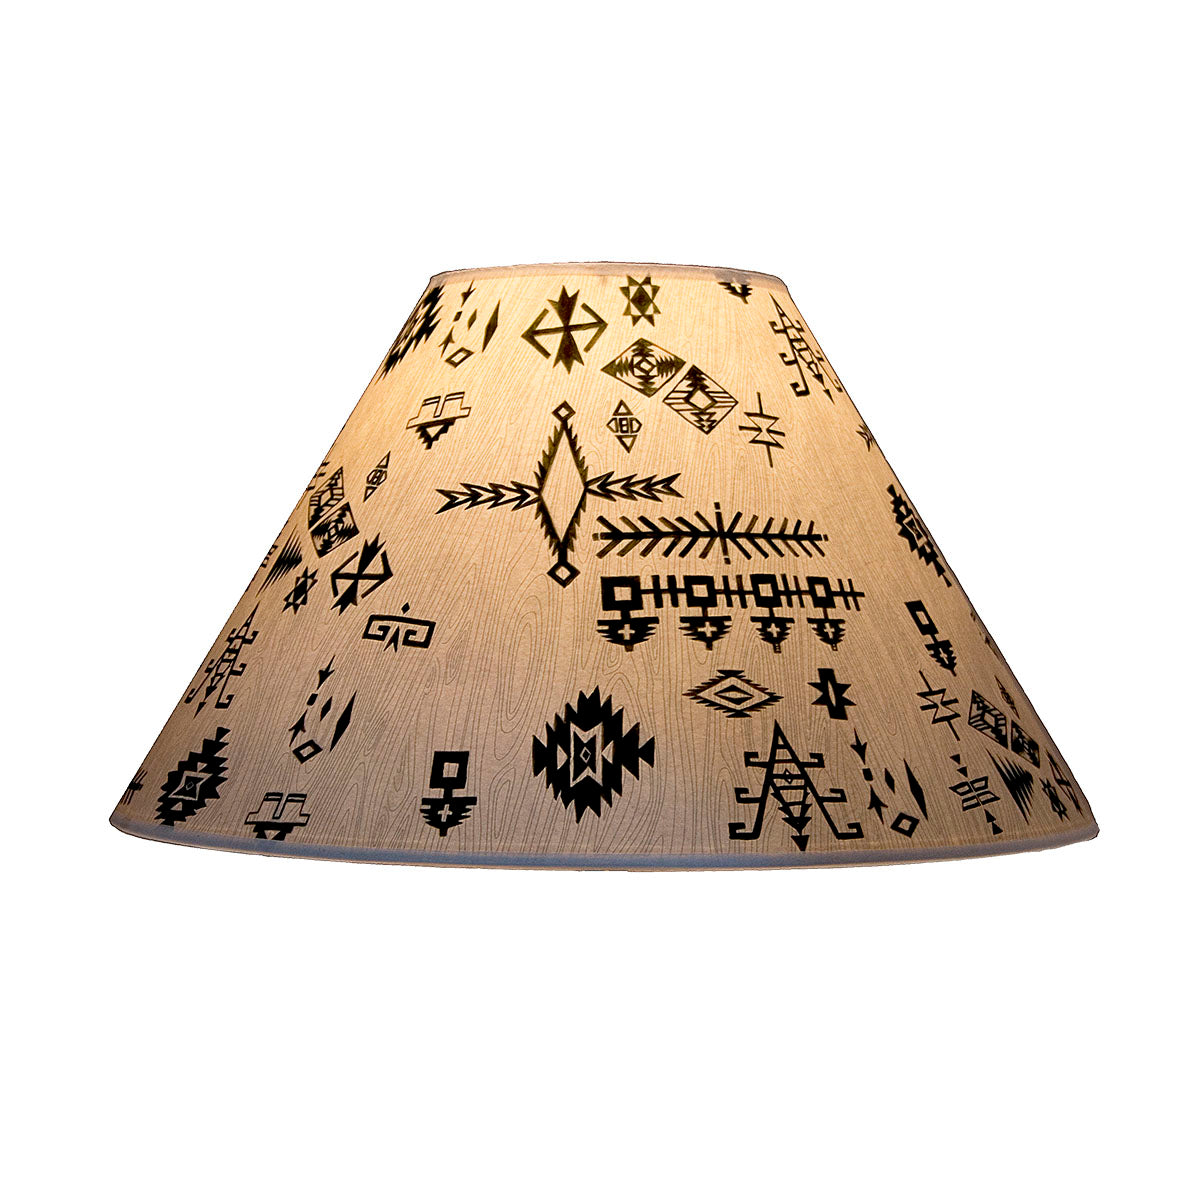 Janna Ugone & Co Lamp Shades Medium Conical Lamp Shade in Blanket Sketches